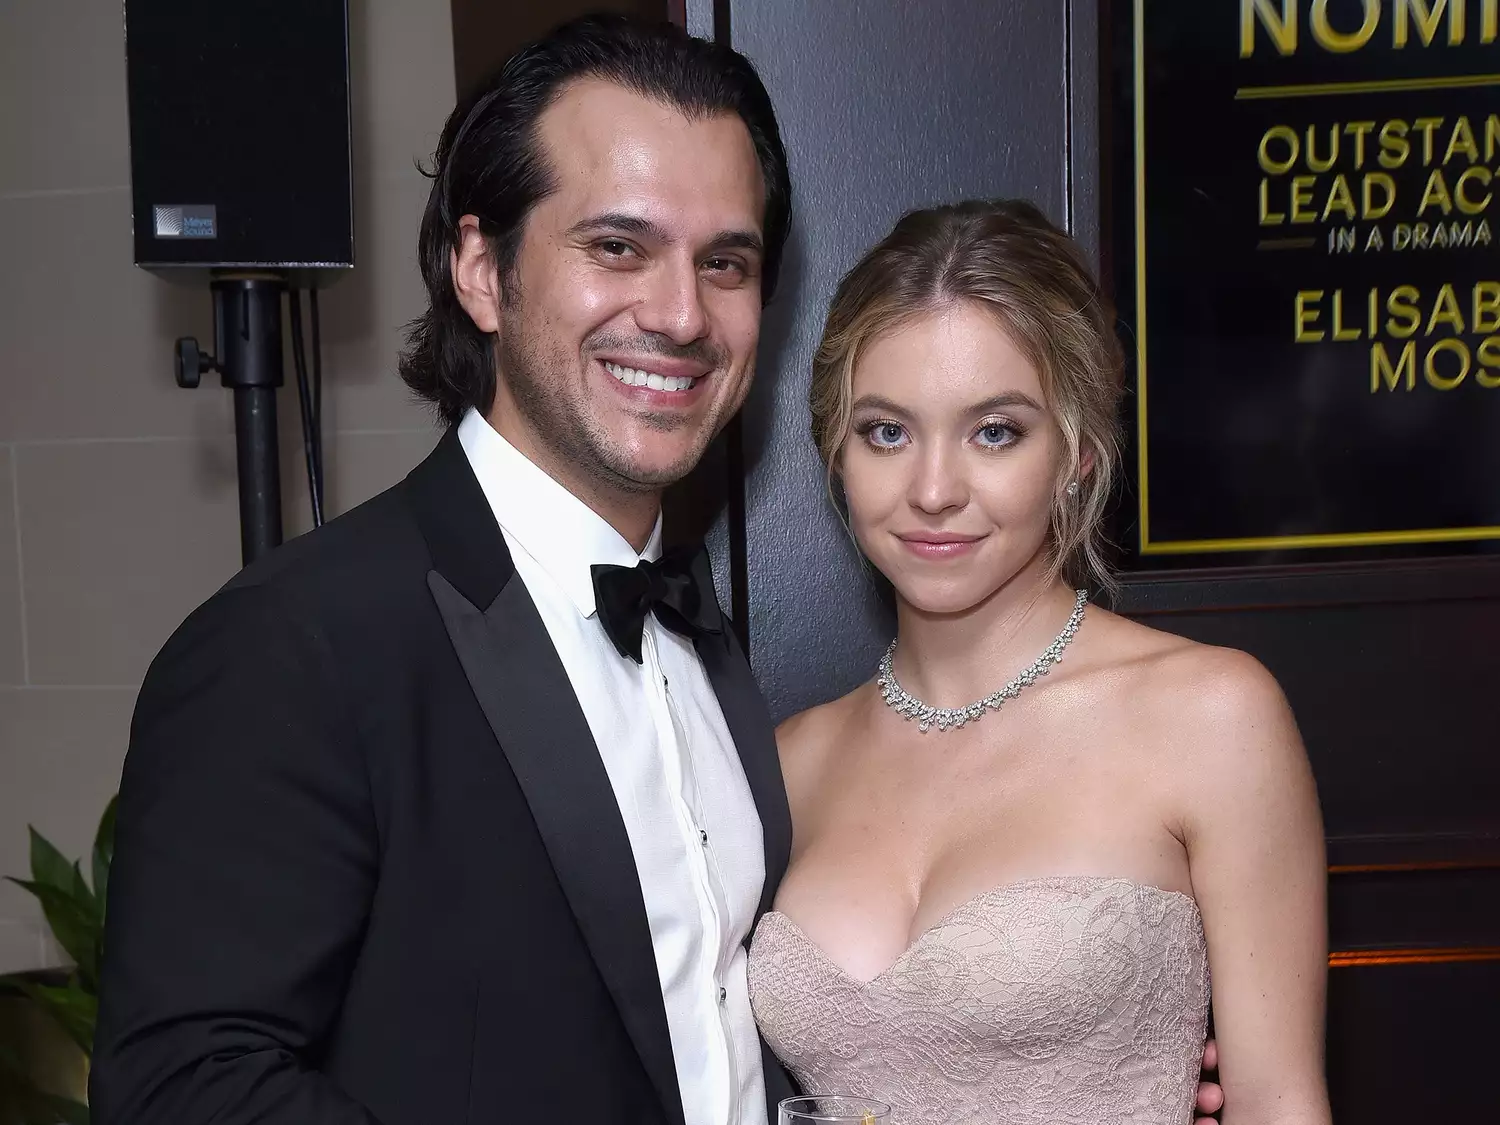 Sydney Sweeney and Jonathan Davino attend Hulu's 2018 Emmy Party at Nomad Hotel Los Angeles on September 17, 2018. 